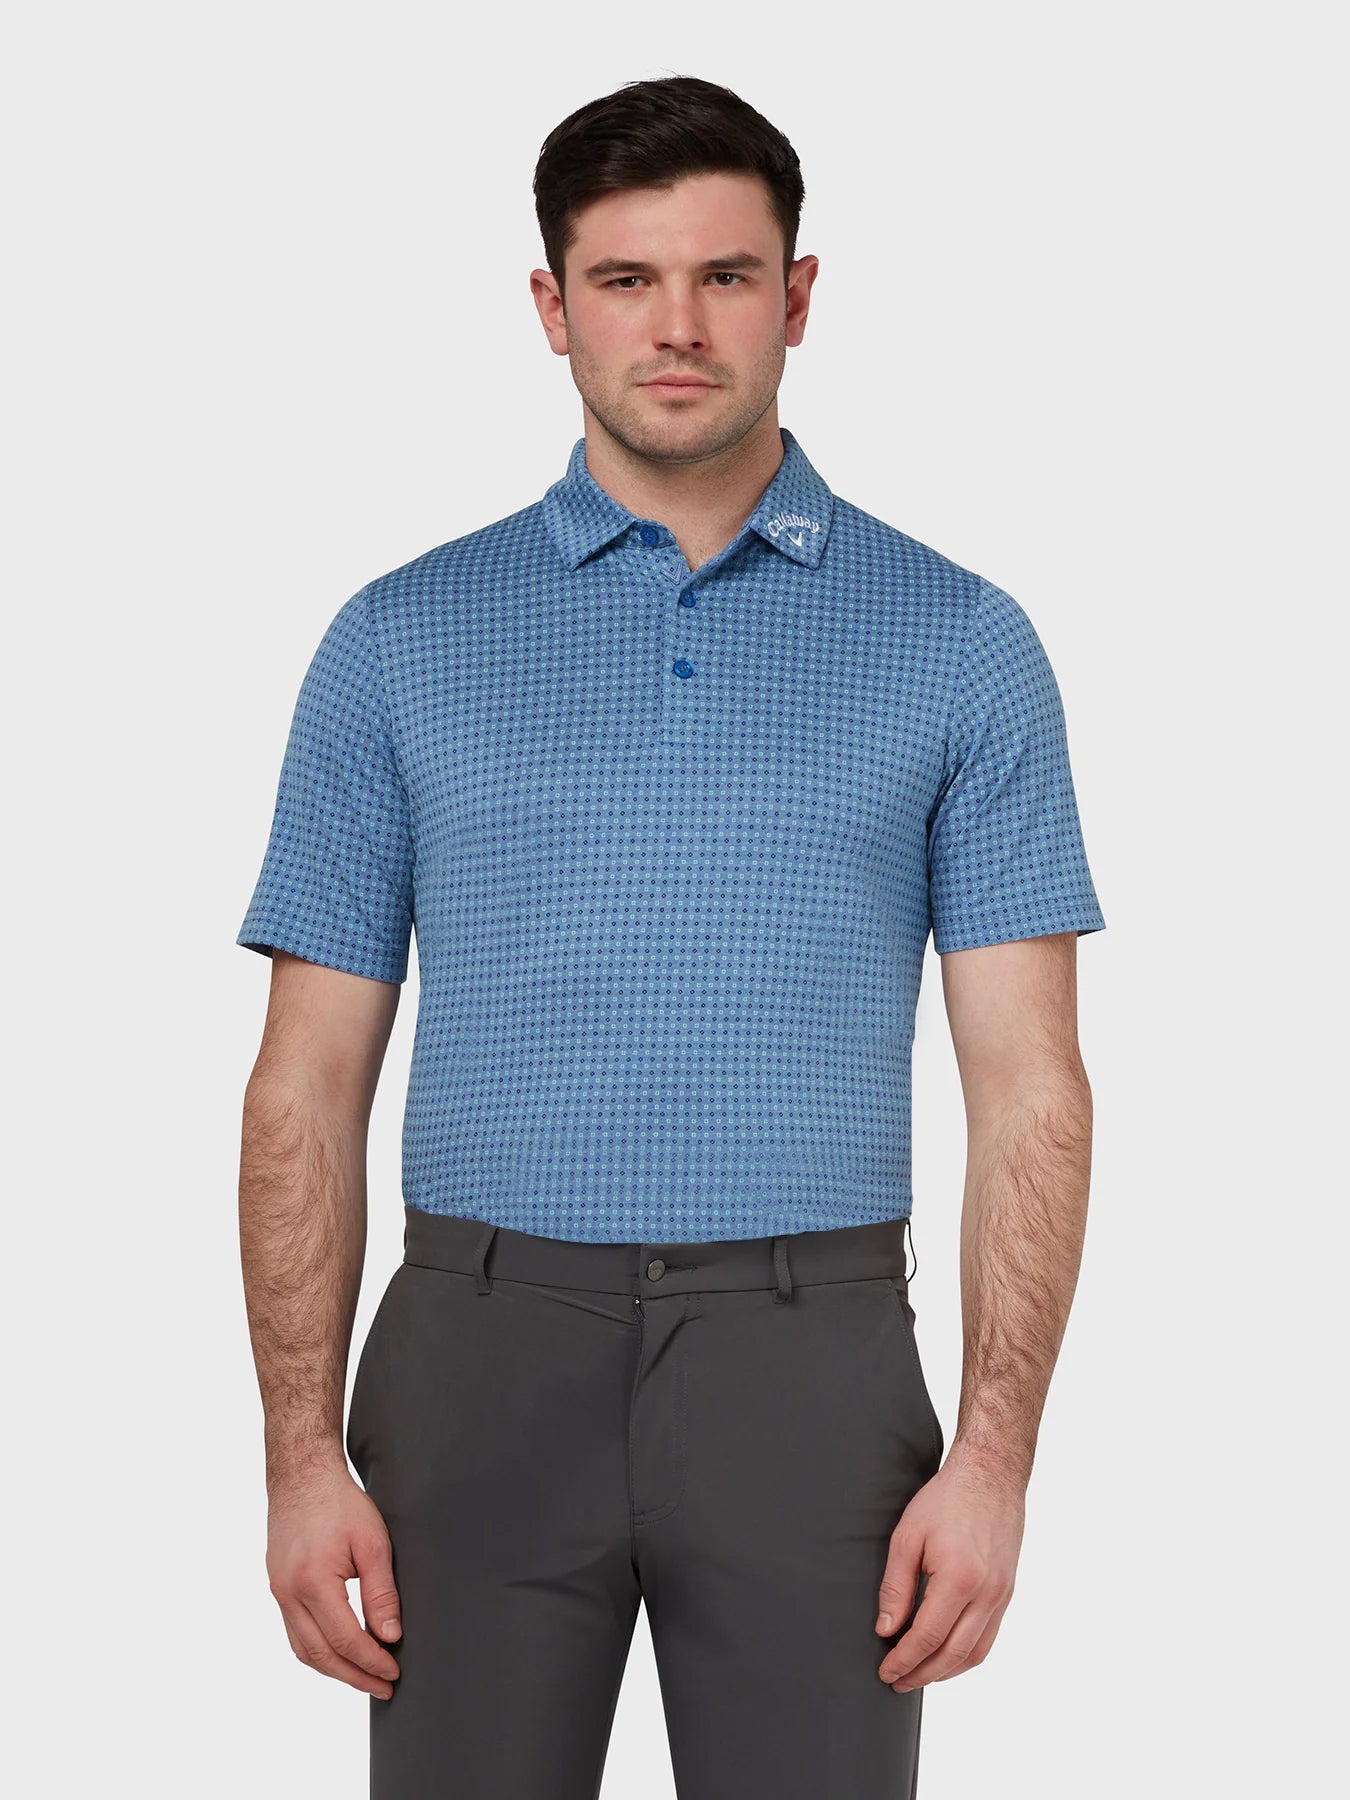 View Soft Touch Micro Print Polo In Magnetic Blue Heather Magnetic Blue Heather S information